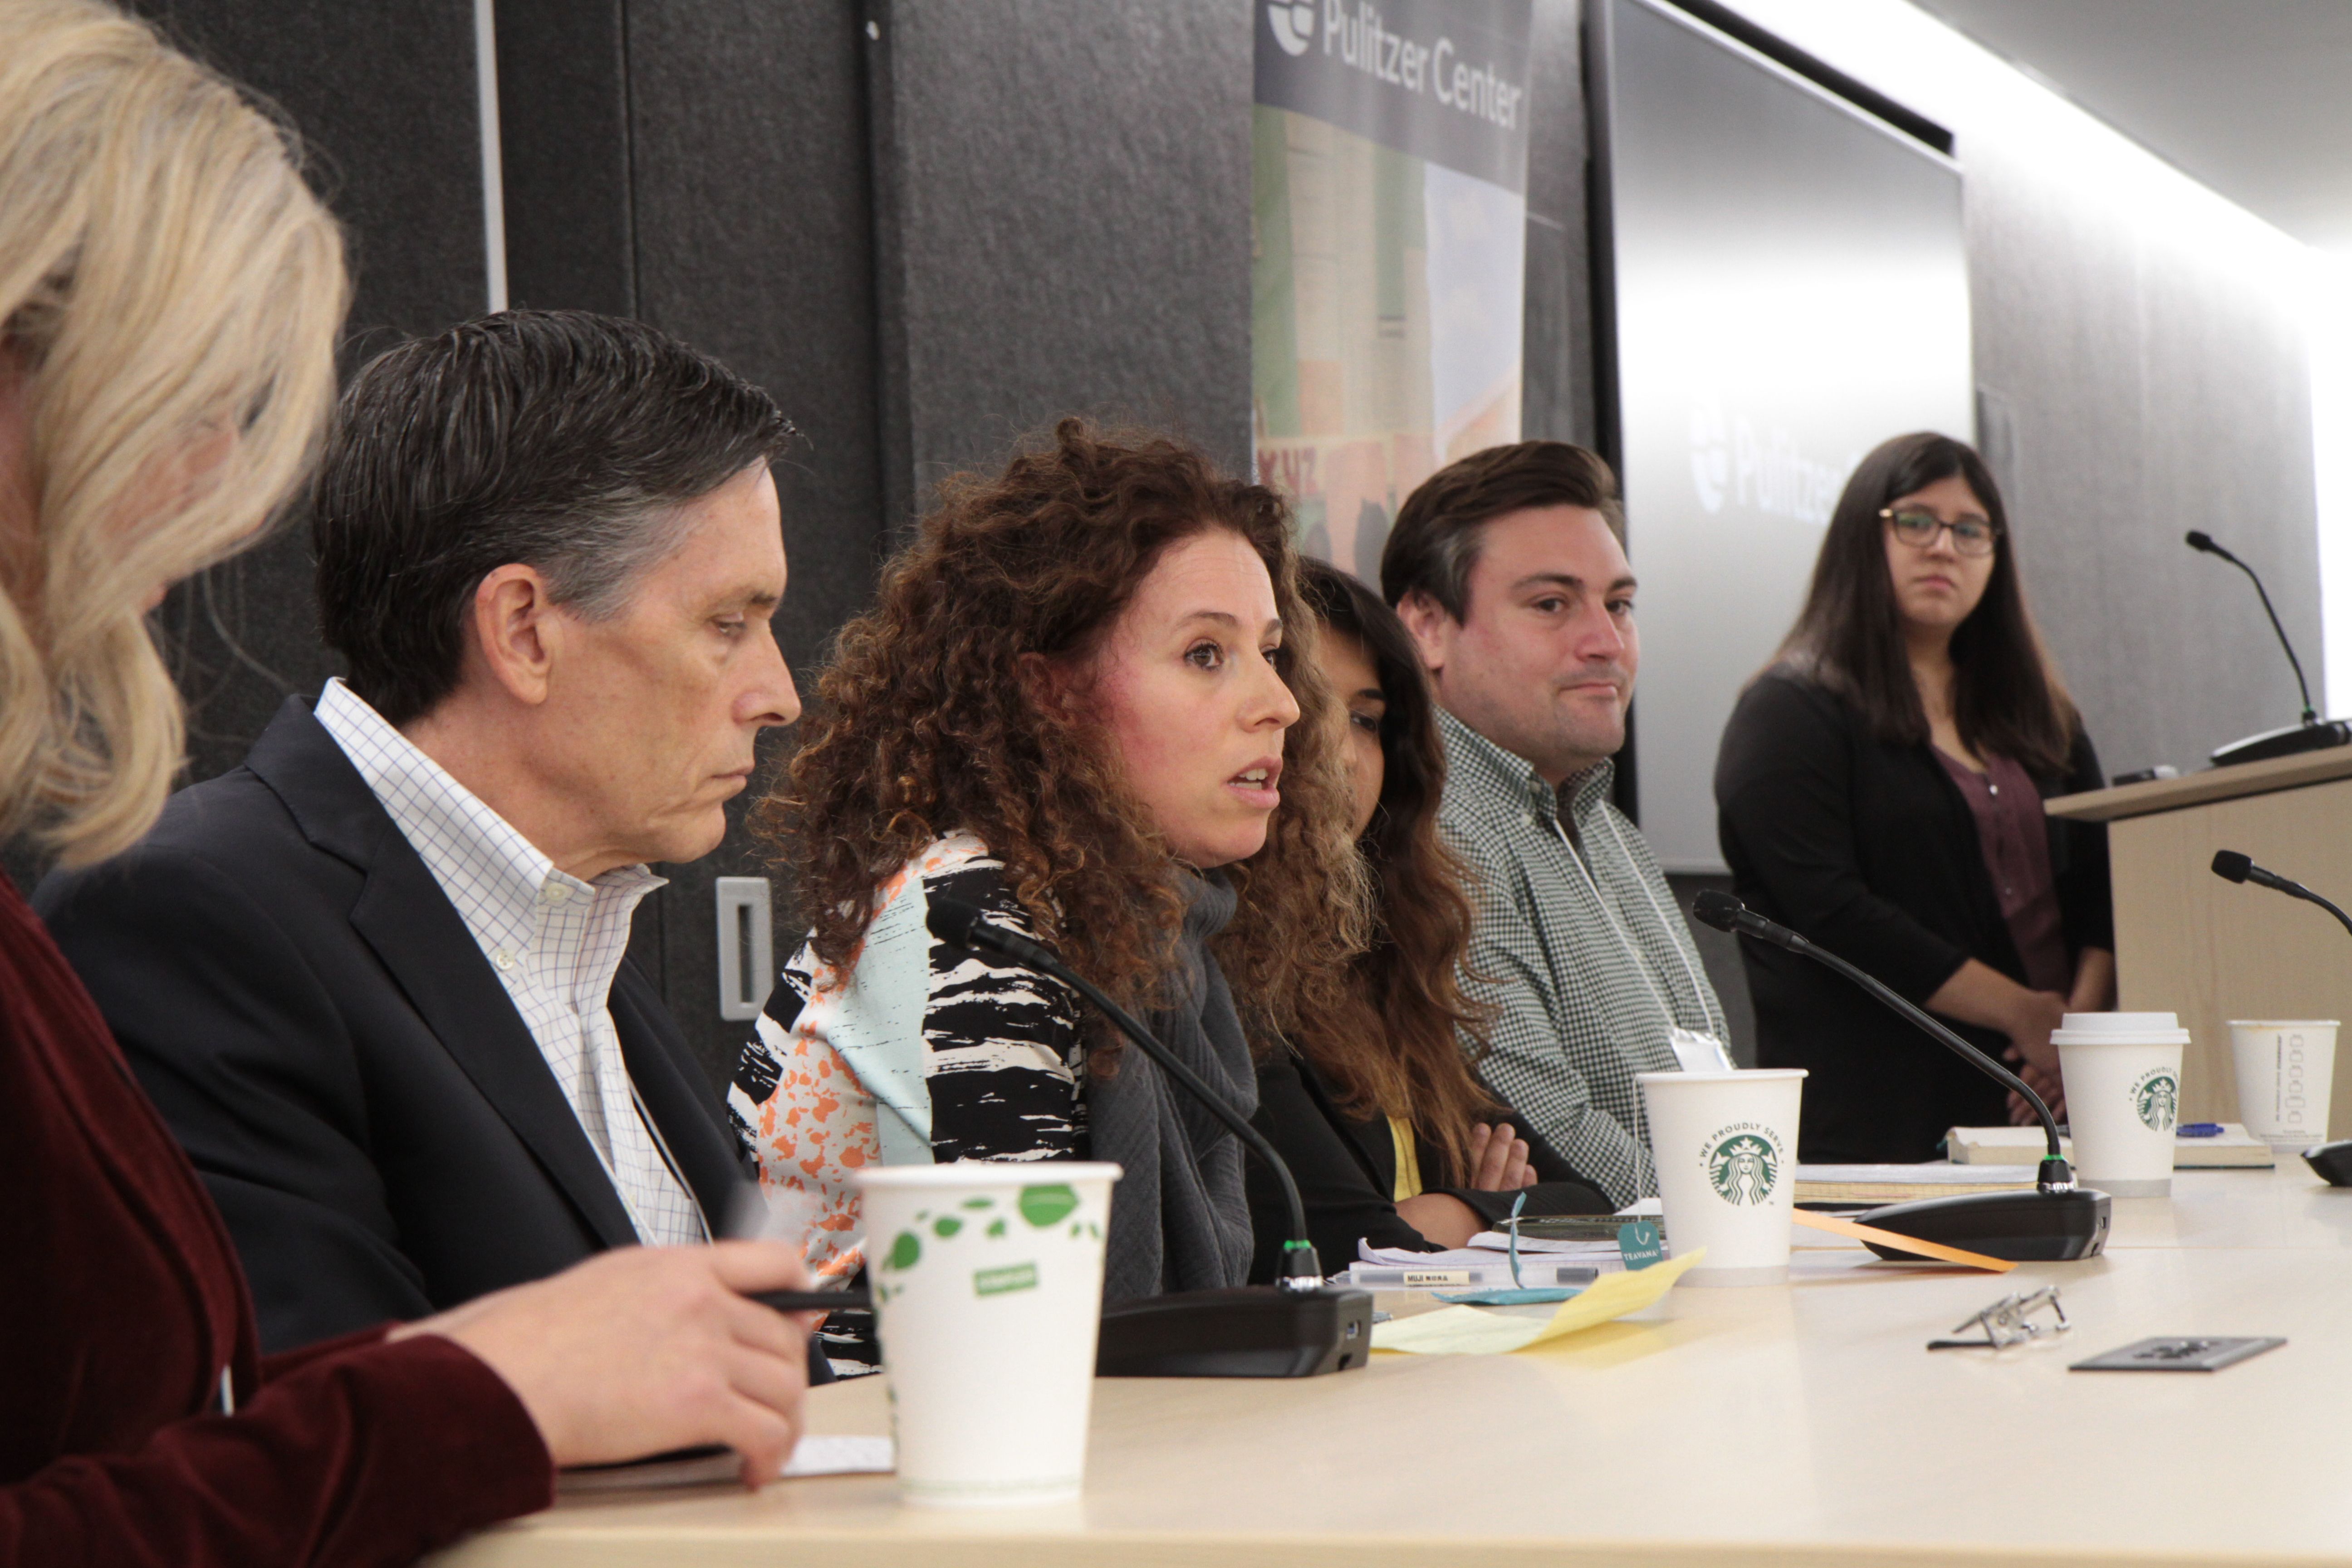 Sarah Wildman, Foreign Policy’s deputy editor for print, host of the First Person podcast, and Pulitzer Center grantee, makes a point during the discussion on pitching as other panelists listen. Image by Claire Seaton. United States, 2019.